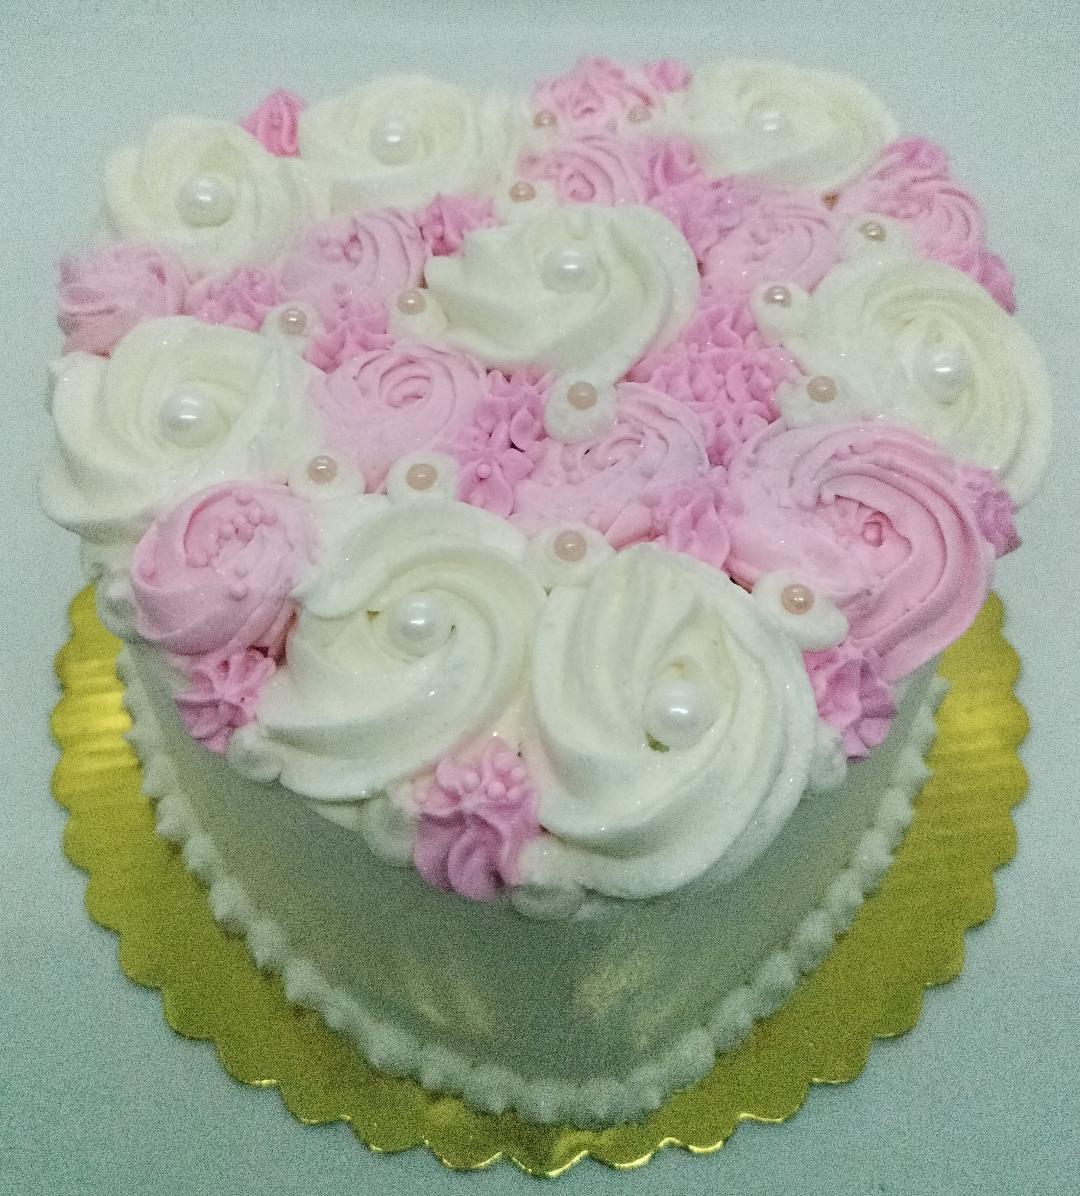 6" 3-layer Decorated Heart Shaped Cake (local delivery or pick-up only)